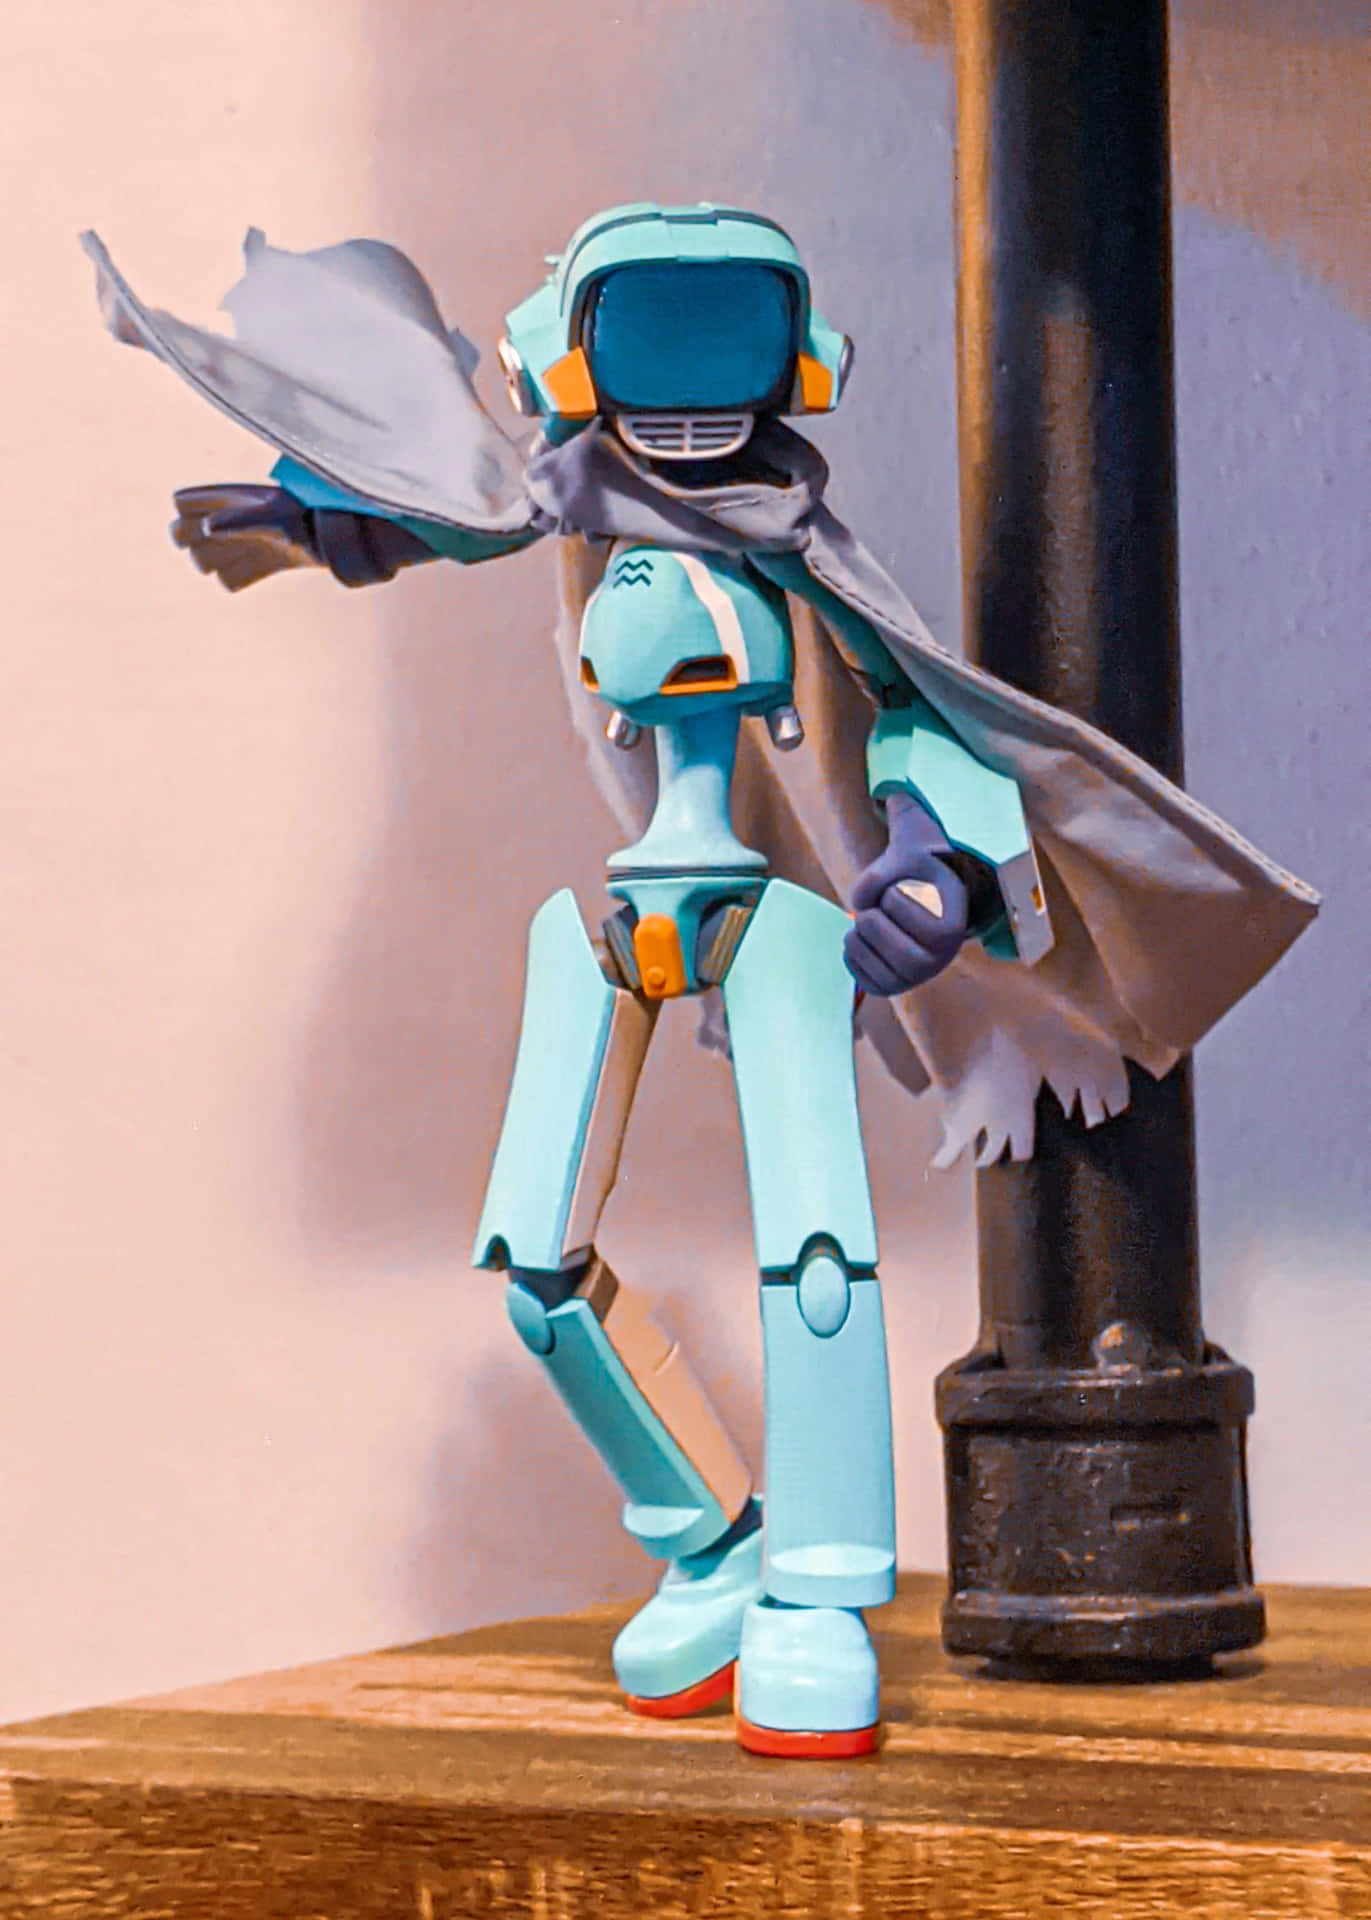 Flcl Canti - The Enigmatic Robot from FLCL Anime Series Wallpaper